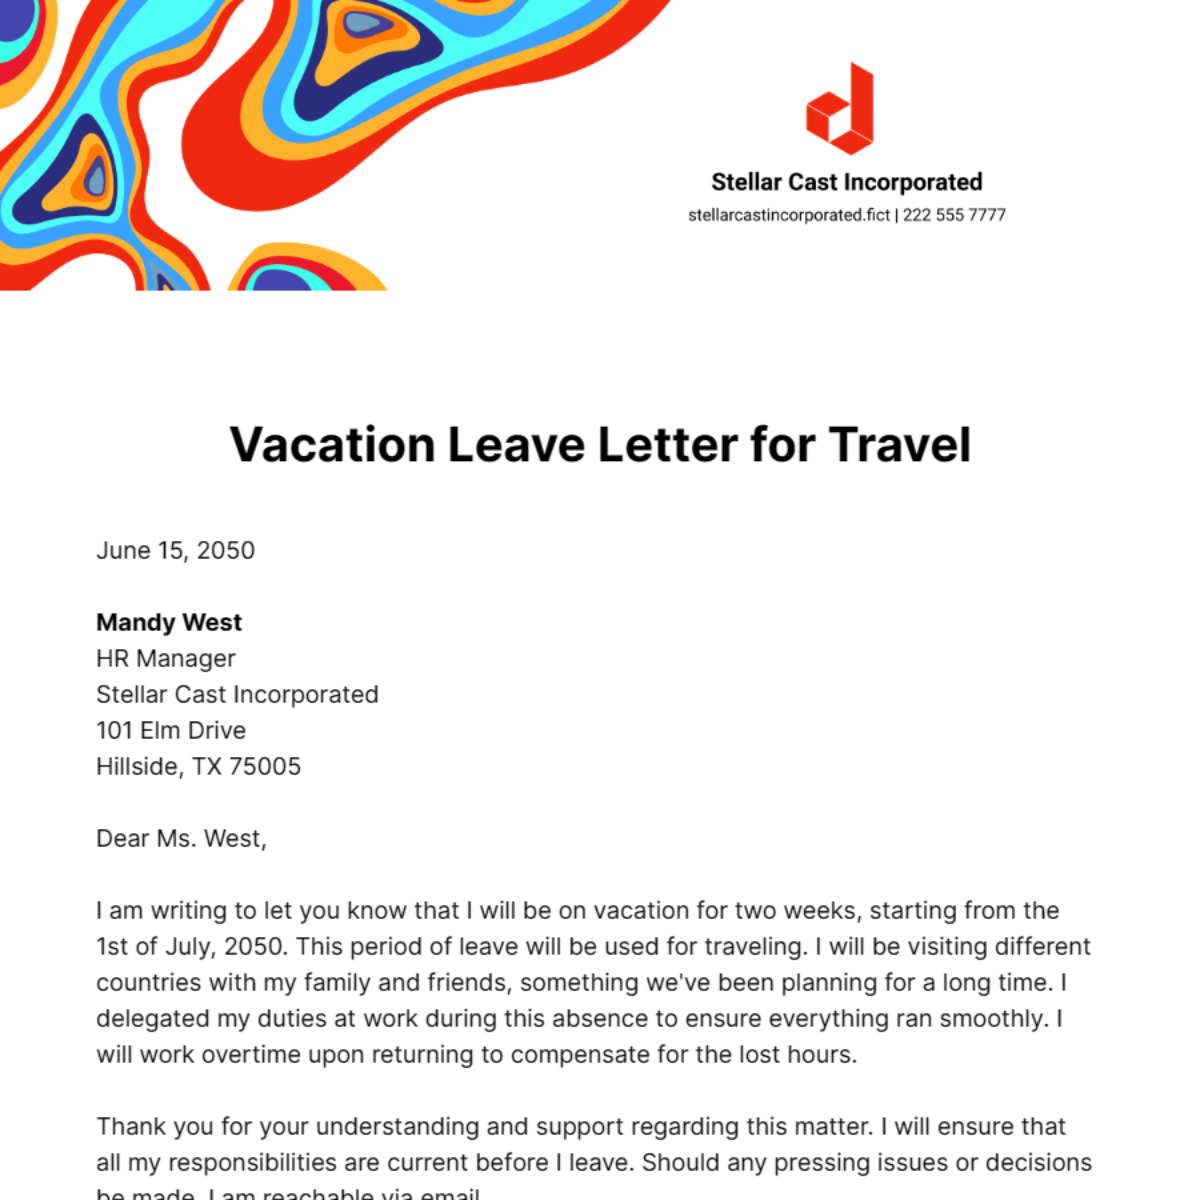 Vacation Leave Letter for Travel Template